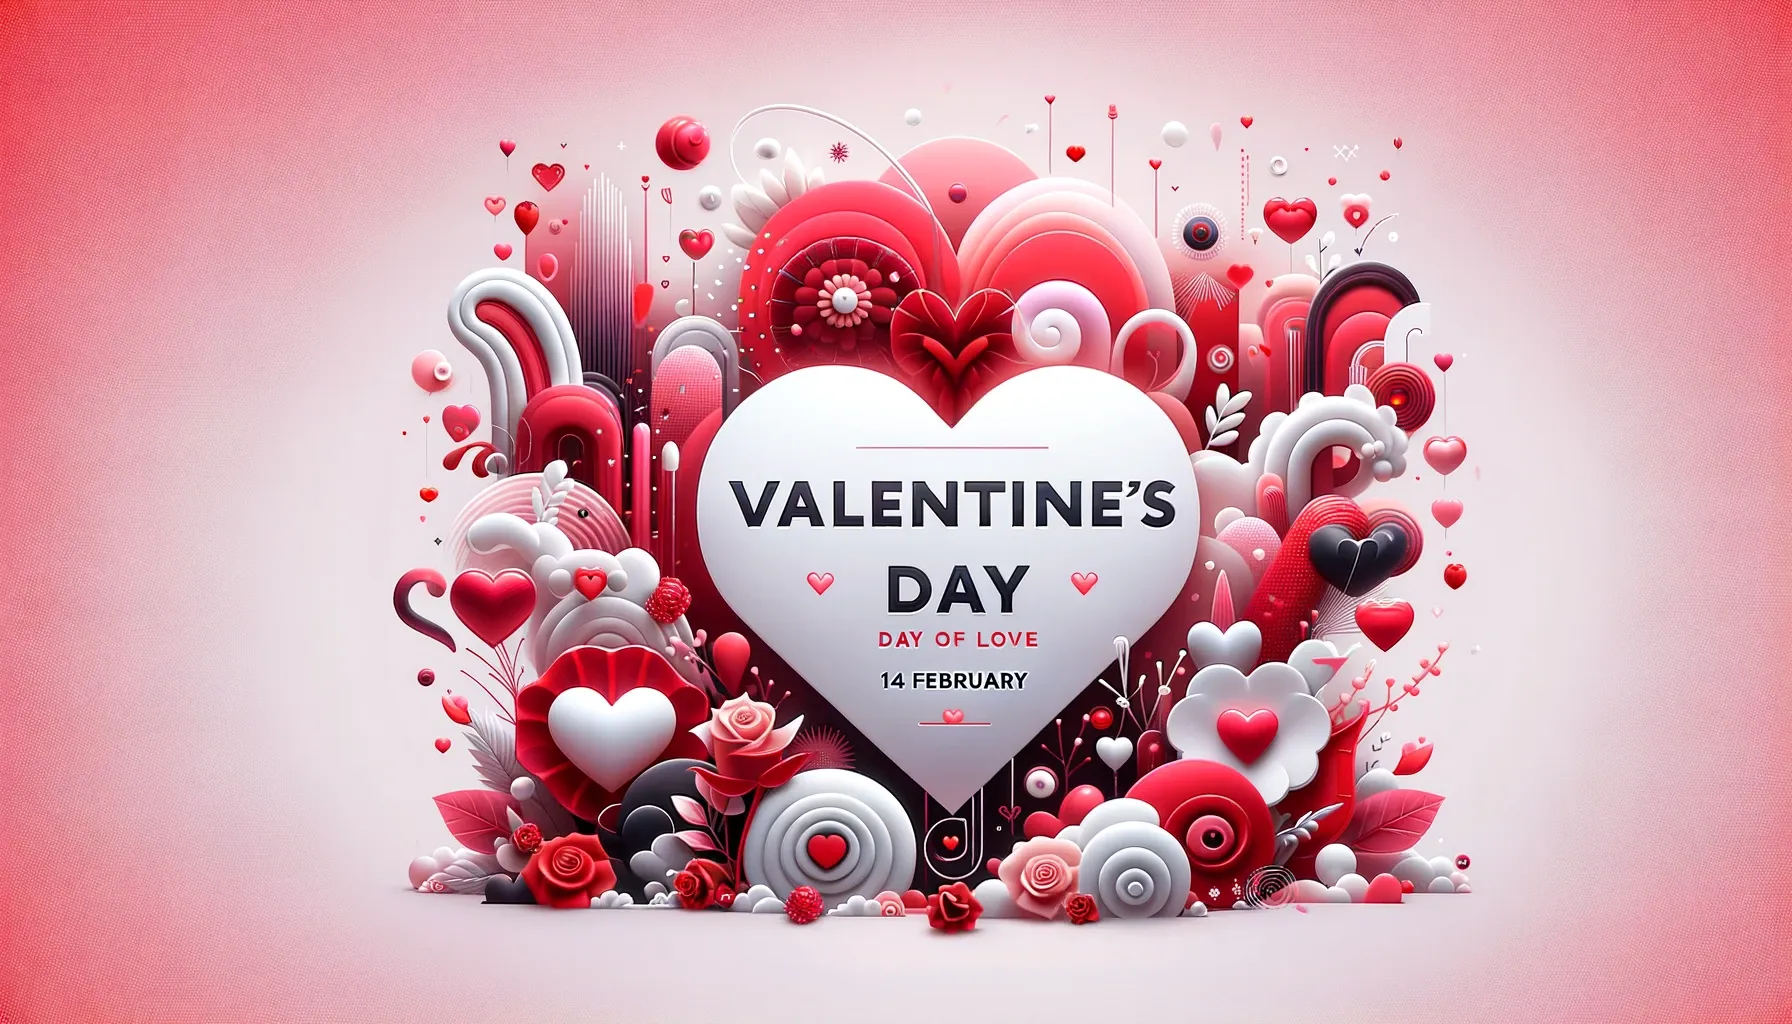 Valentine's Day:A Day of Love(14 February)